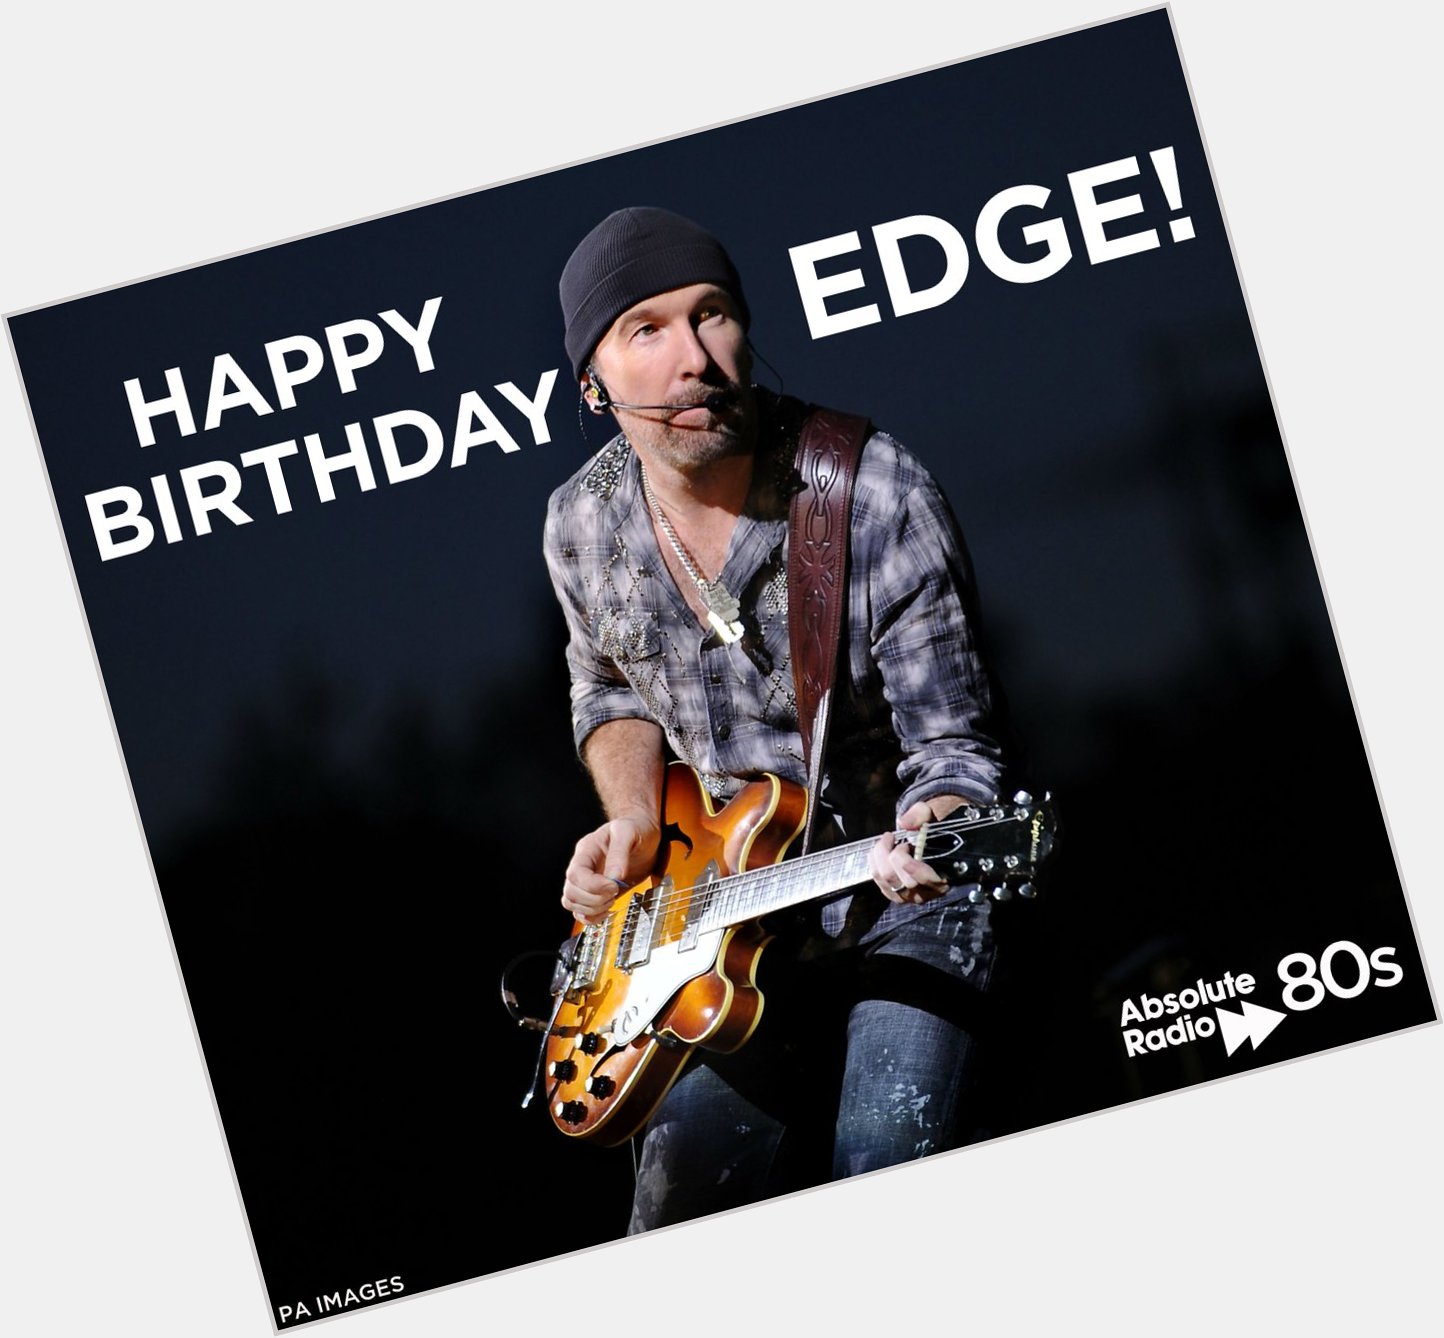 A very happy birthday to Dave Evans a.k.a. \The Edge\ of May your unforgettable fire keep burning brightly! 